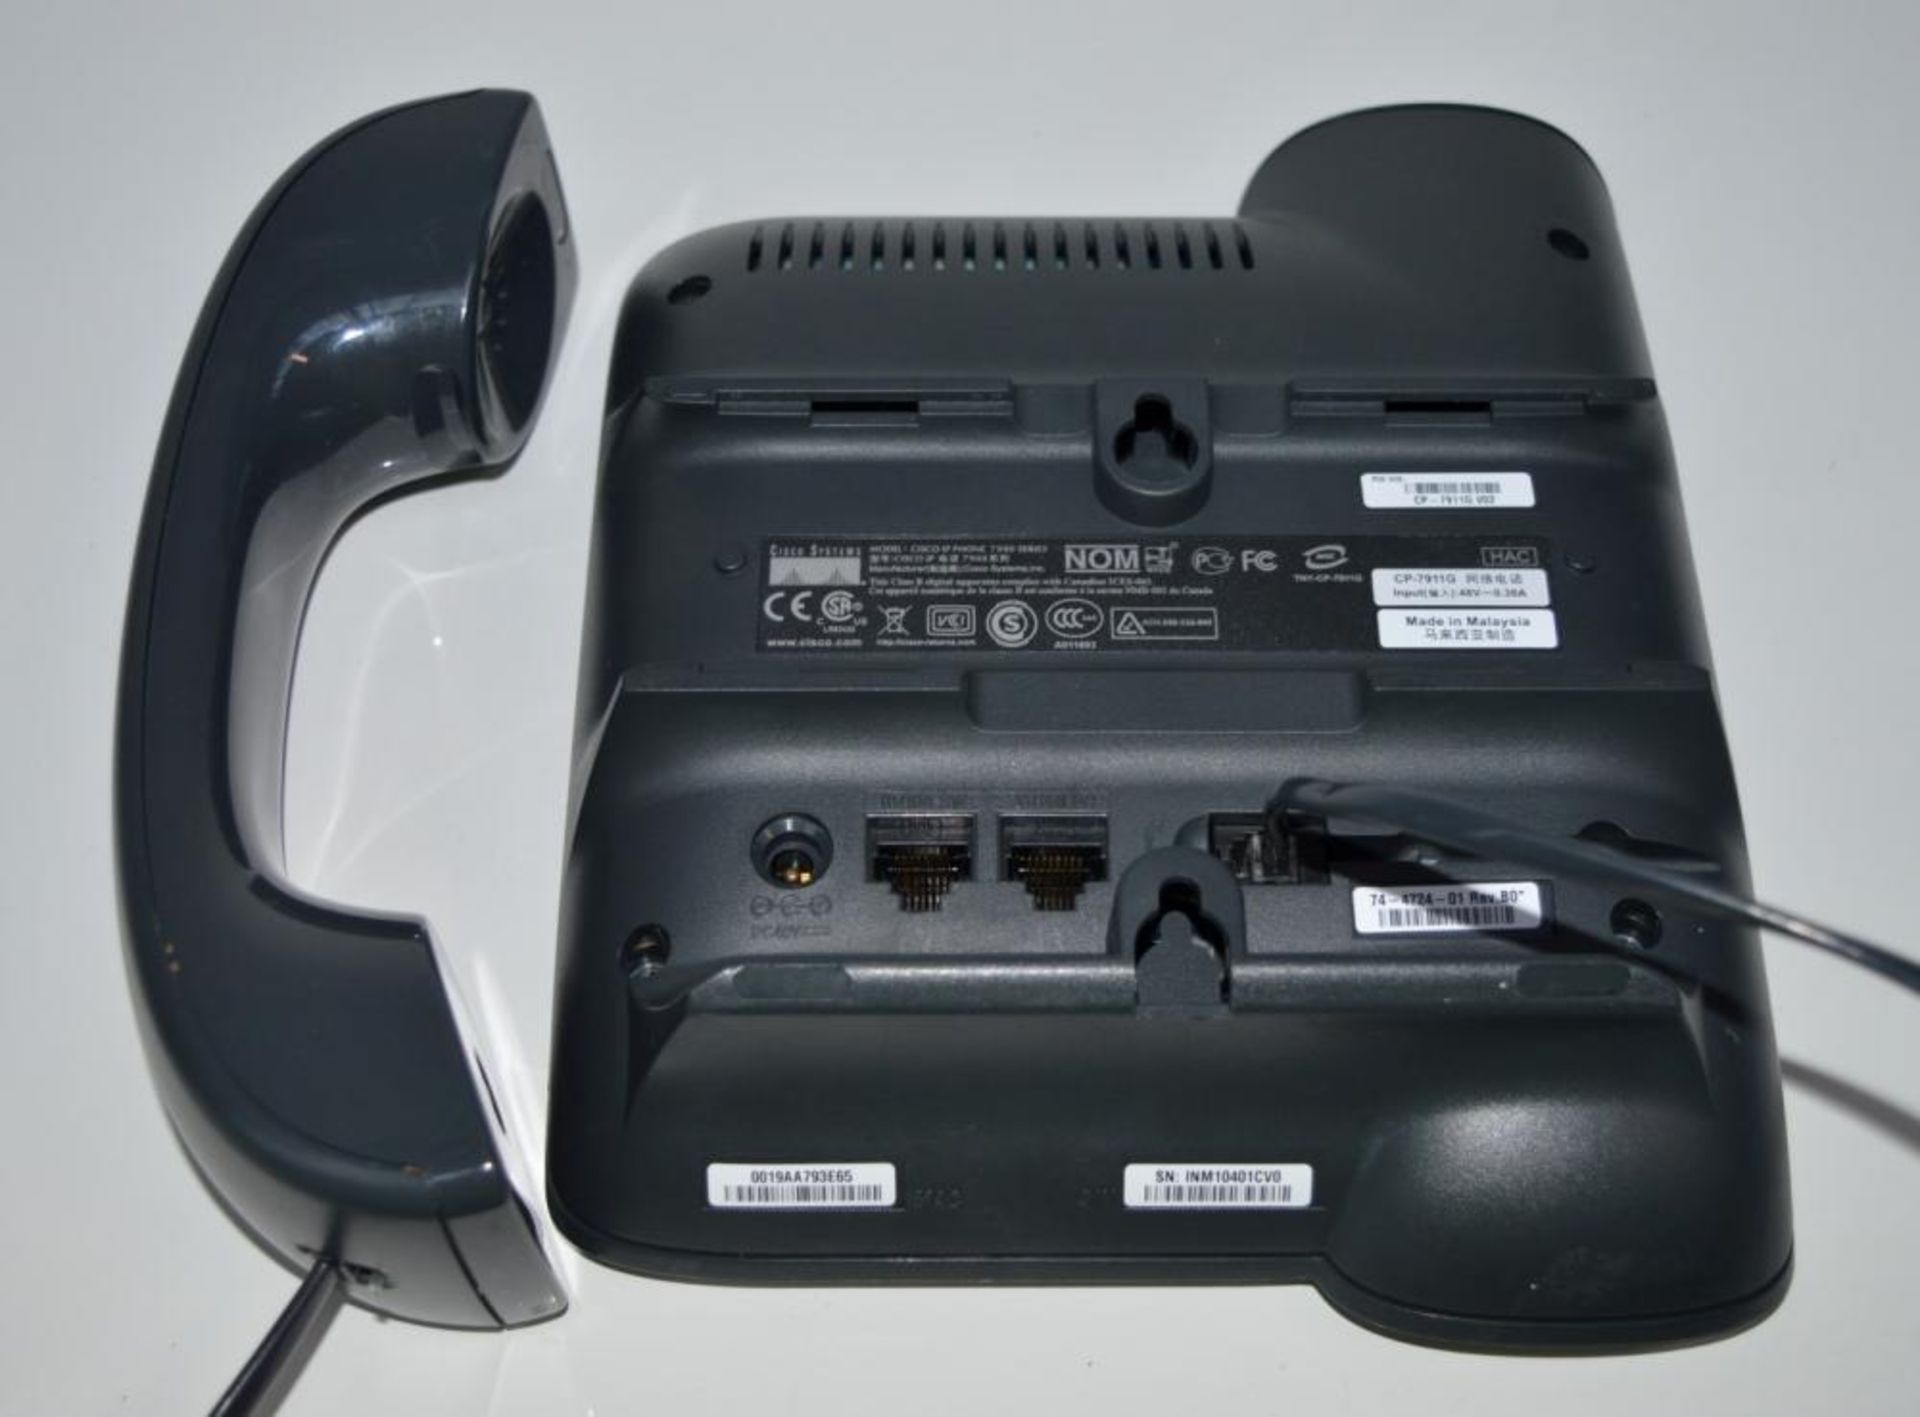 4 x Cisco CP-7911G Unified IP SIP Phones - Removed From a Working Office Environment in Good Conditi - Image 4 of 8